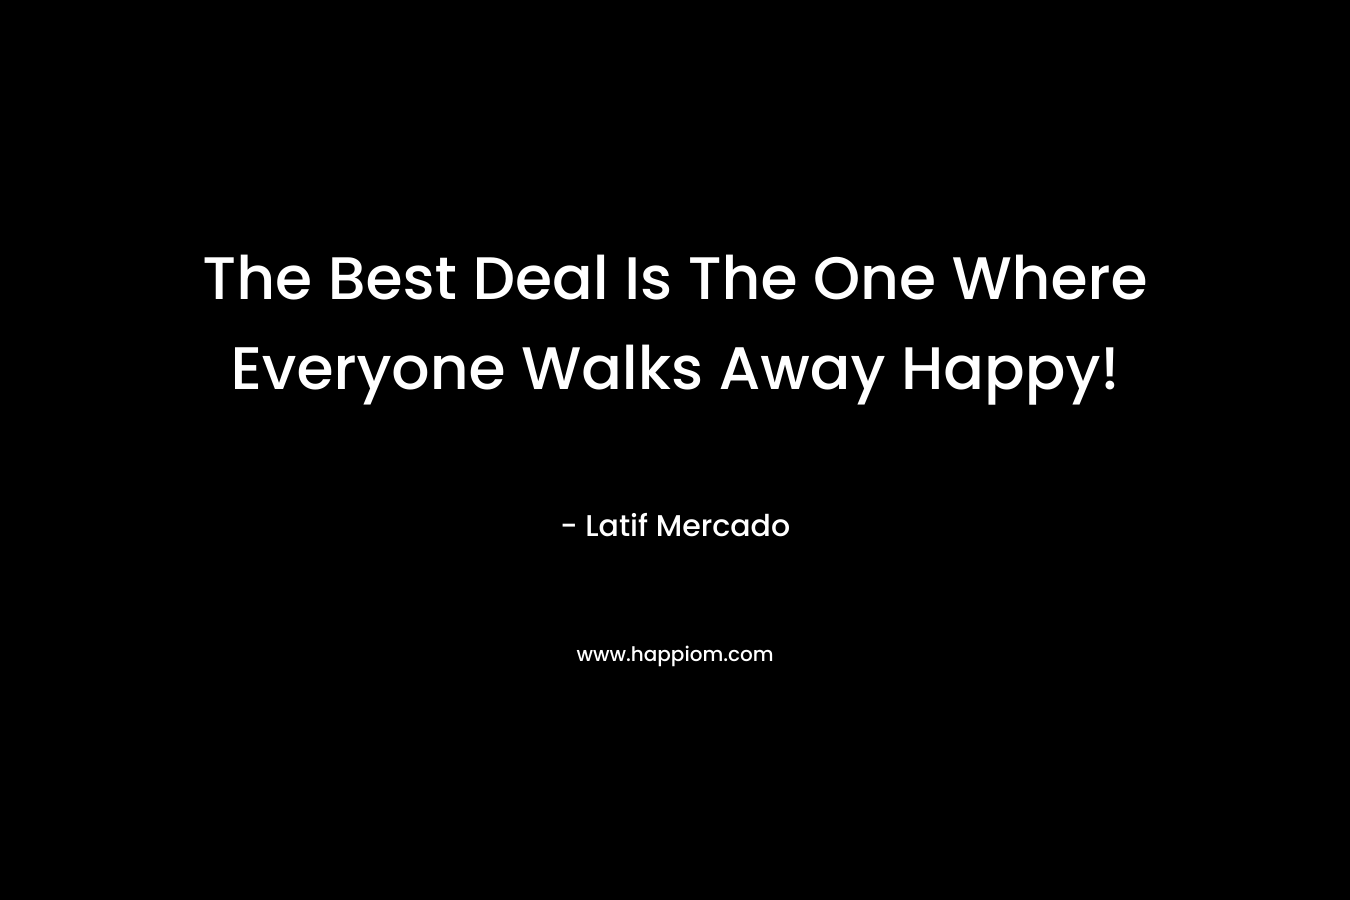 The Best Deal Is The One Where Everyone Walks Away Happy! – Latif Mercado